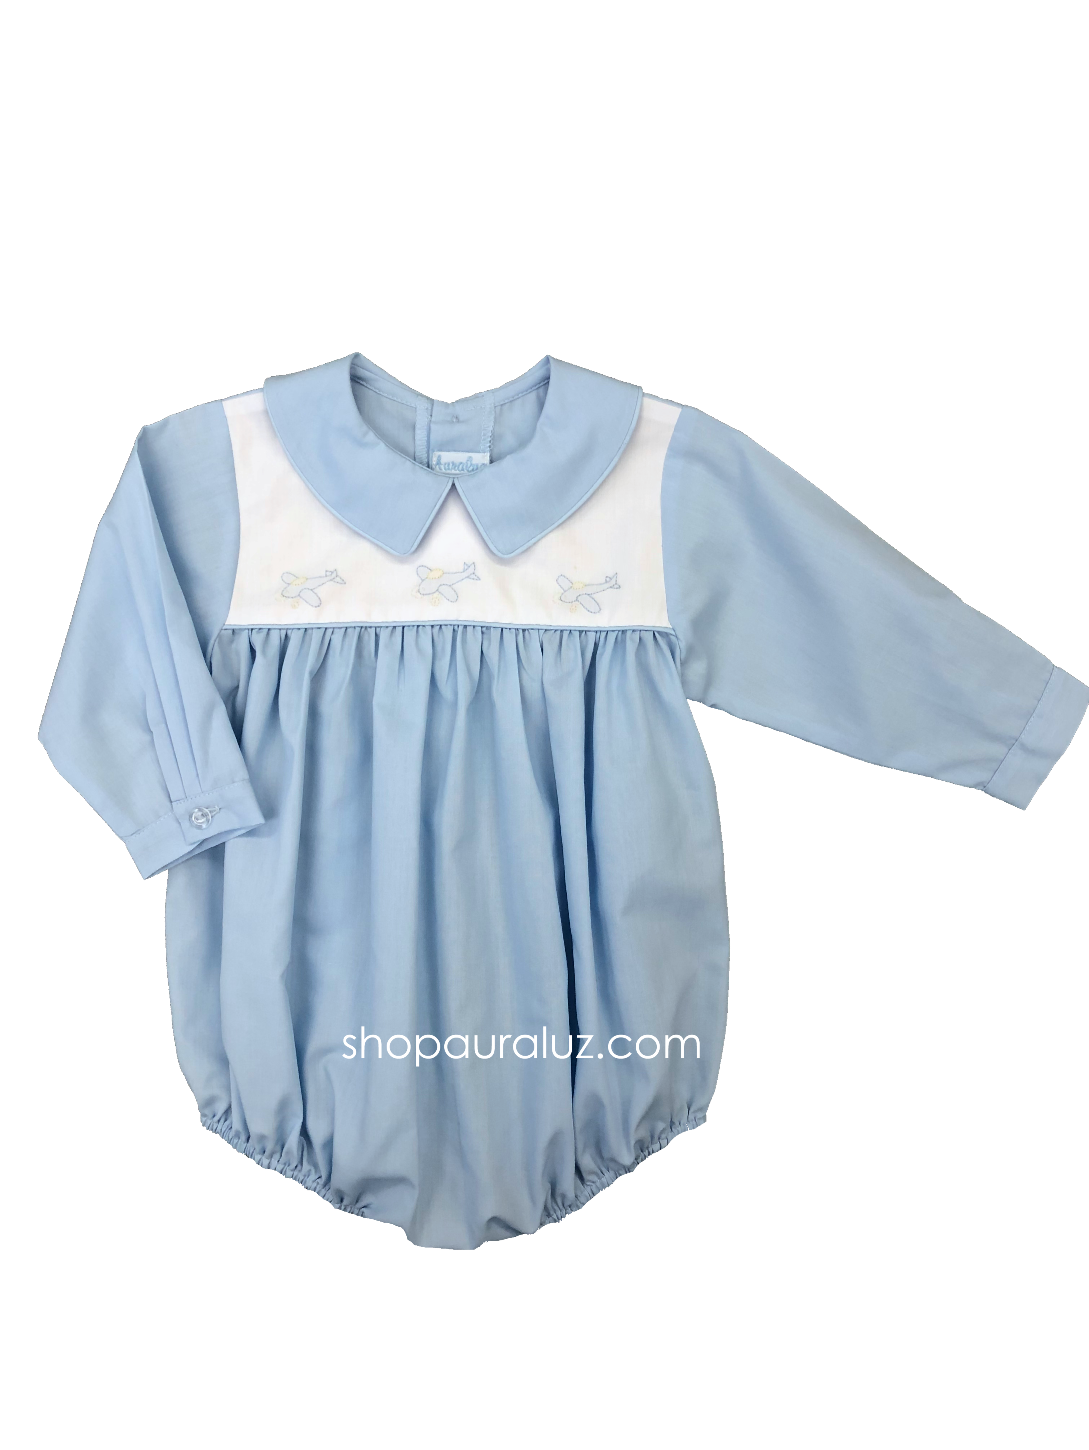 Auraluz Boy Bubble..l/s..Blue with boy collar and embroidered airplanes